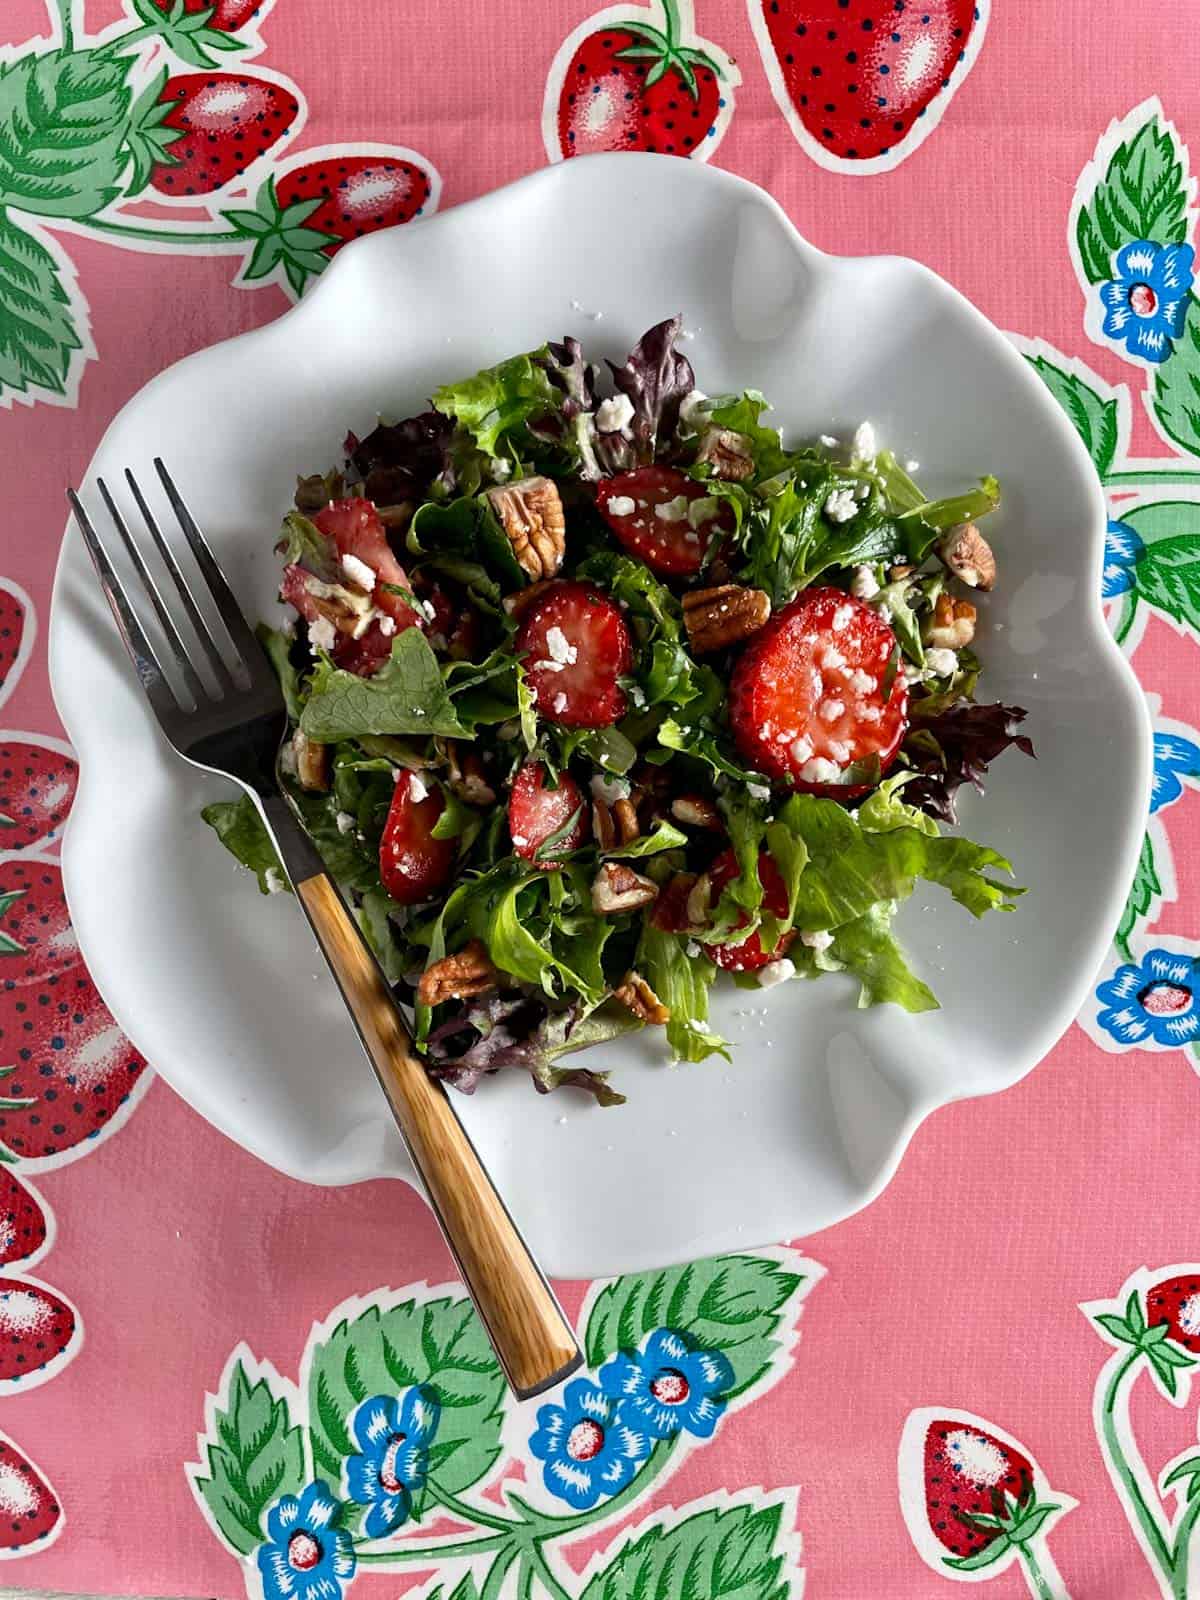 A white bowl of strawberry salad, pecans, and feta with a wooden handled fork.